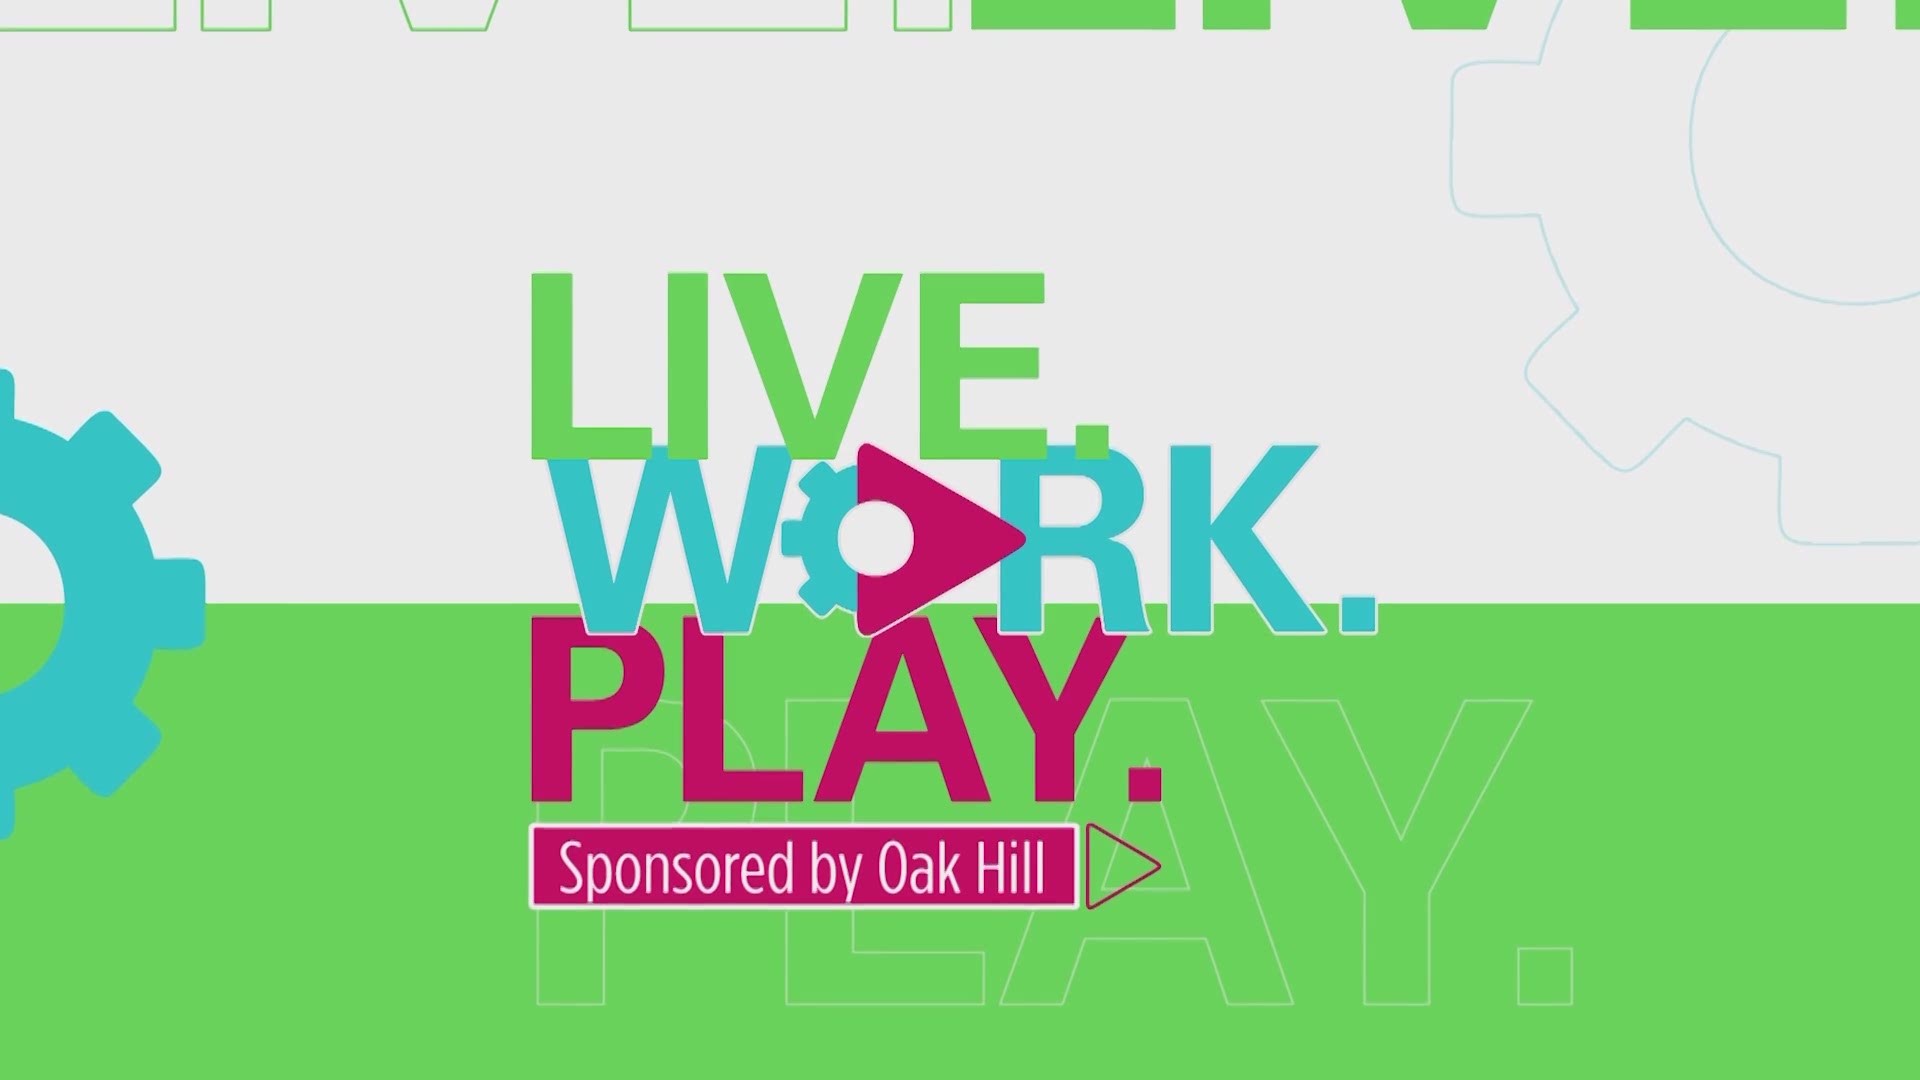 Oak Hill joins Live.Work.Play to explain how they are adjusting during the Covid-19 Pandemic.